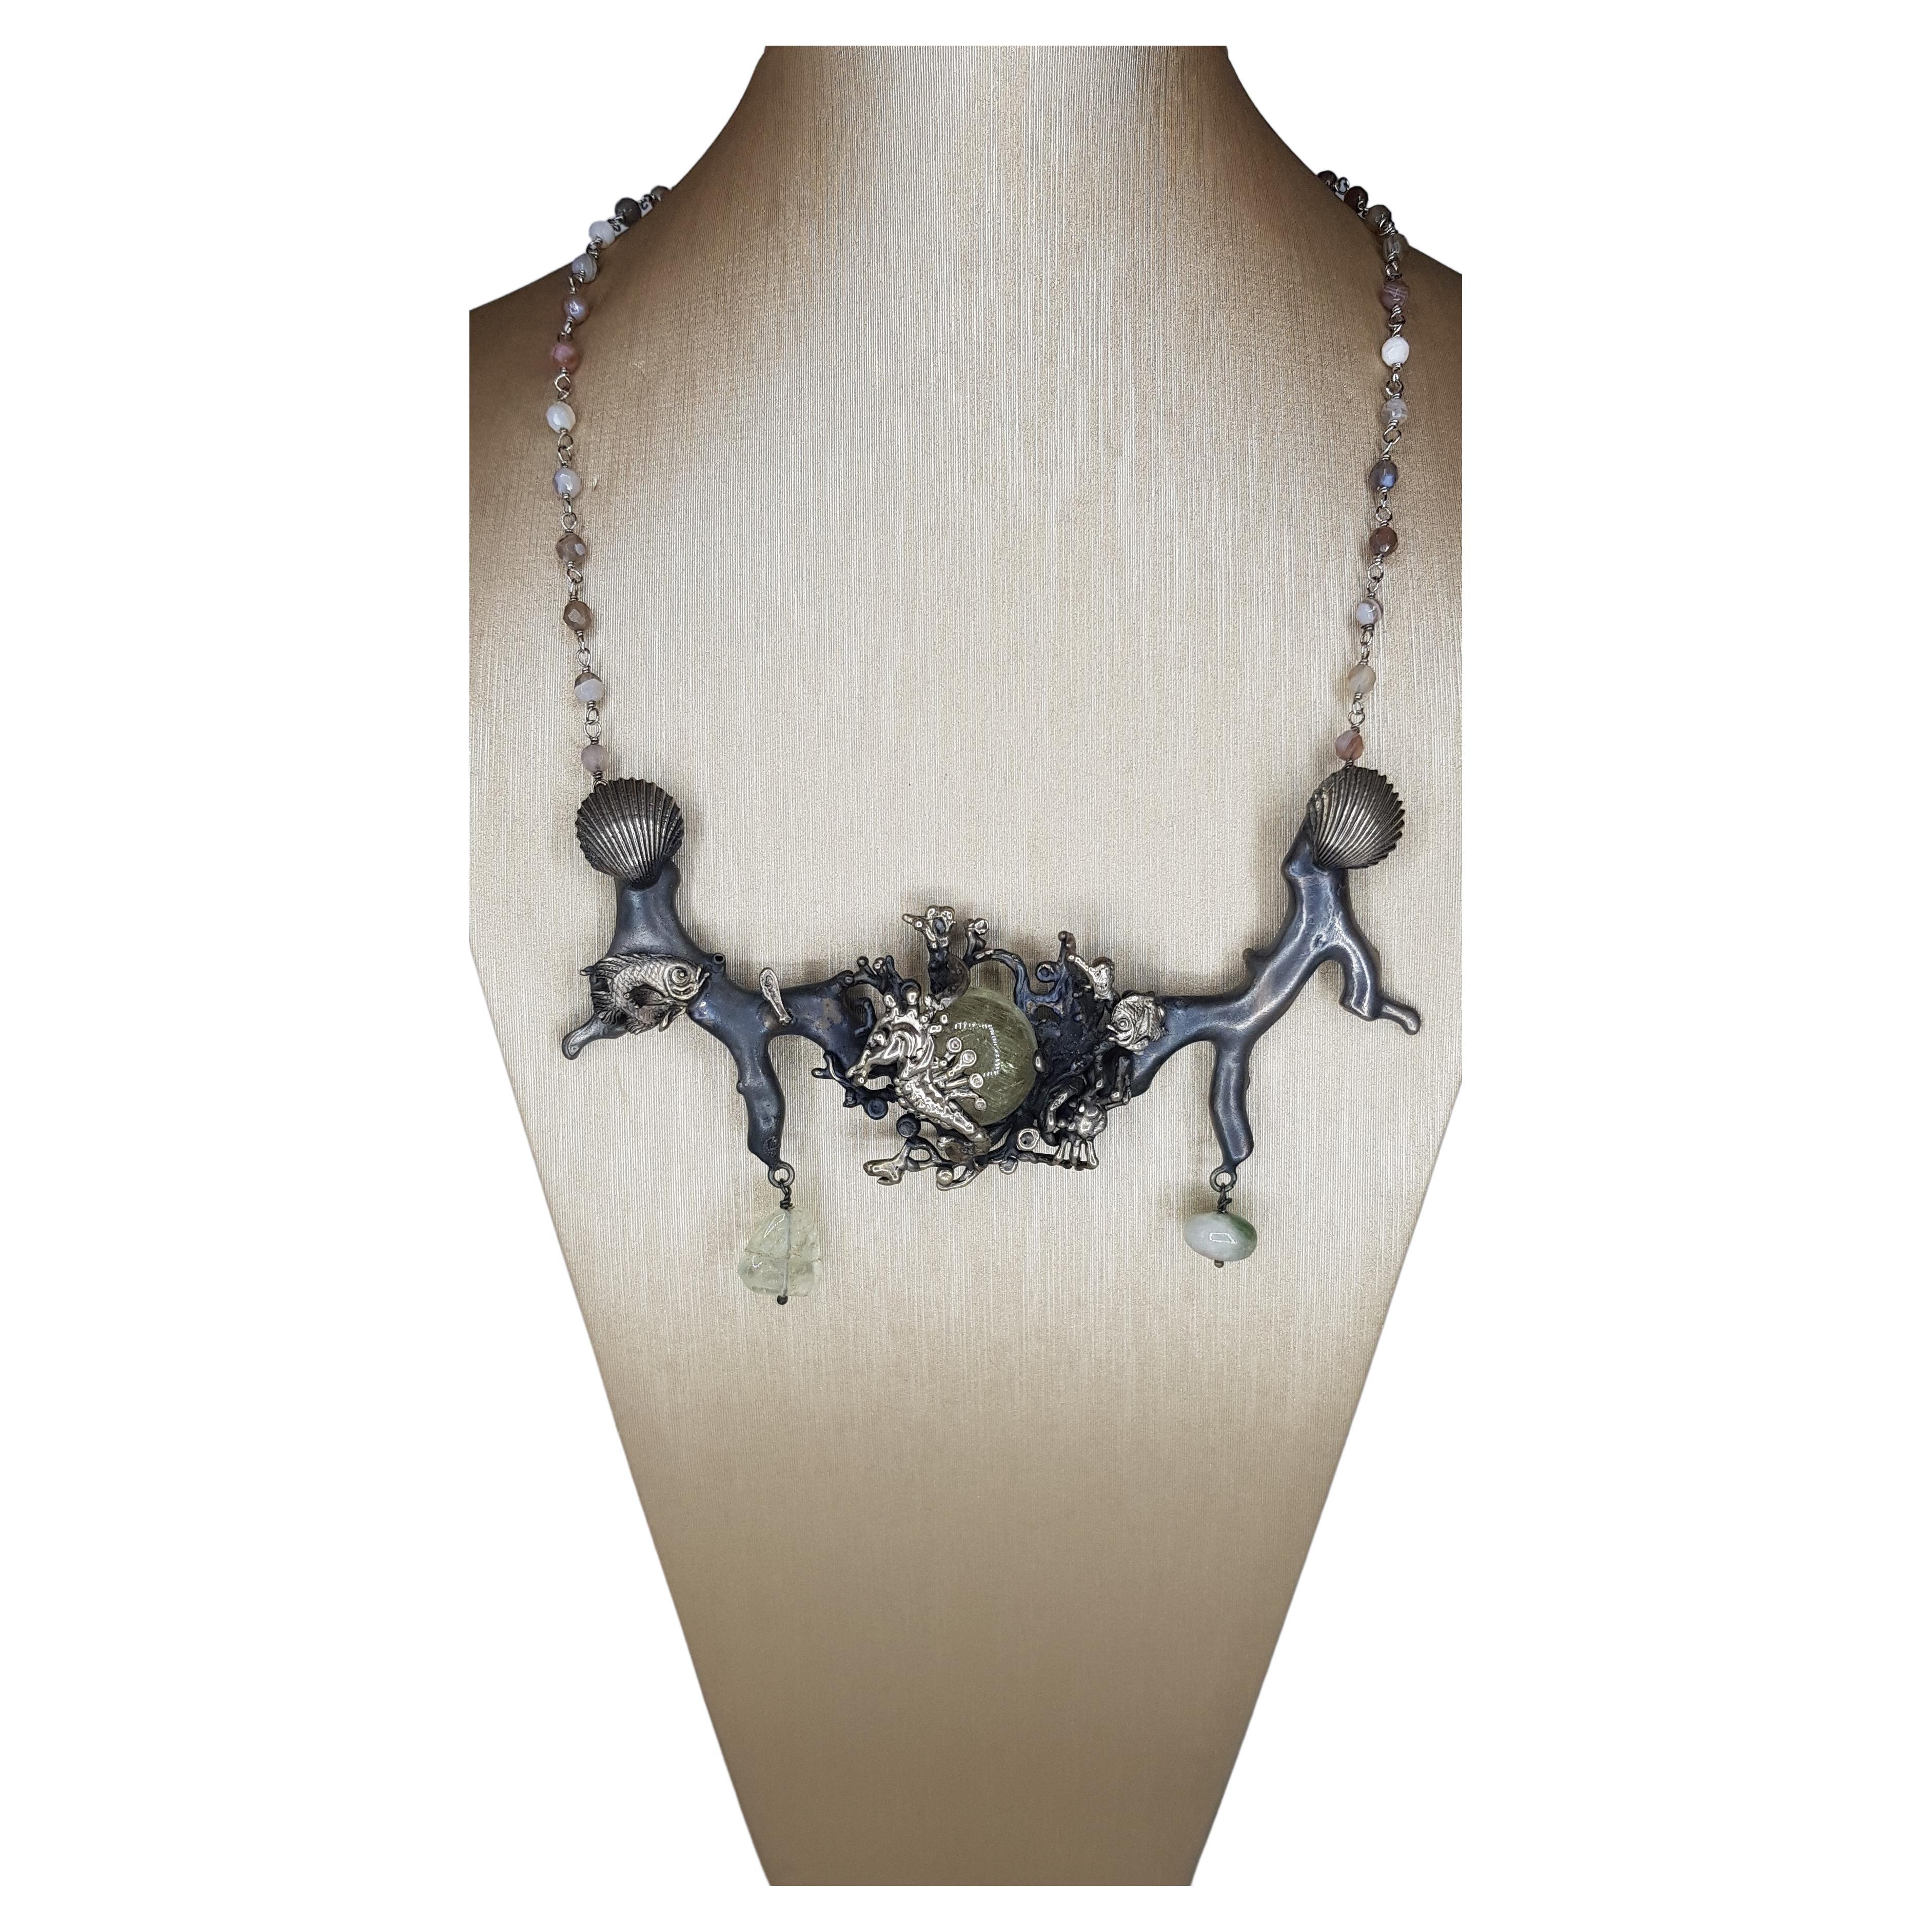 D'avossa Silver Necklace, Green Aquamarine Cabochon and Agatha Chain For Sale